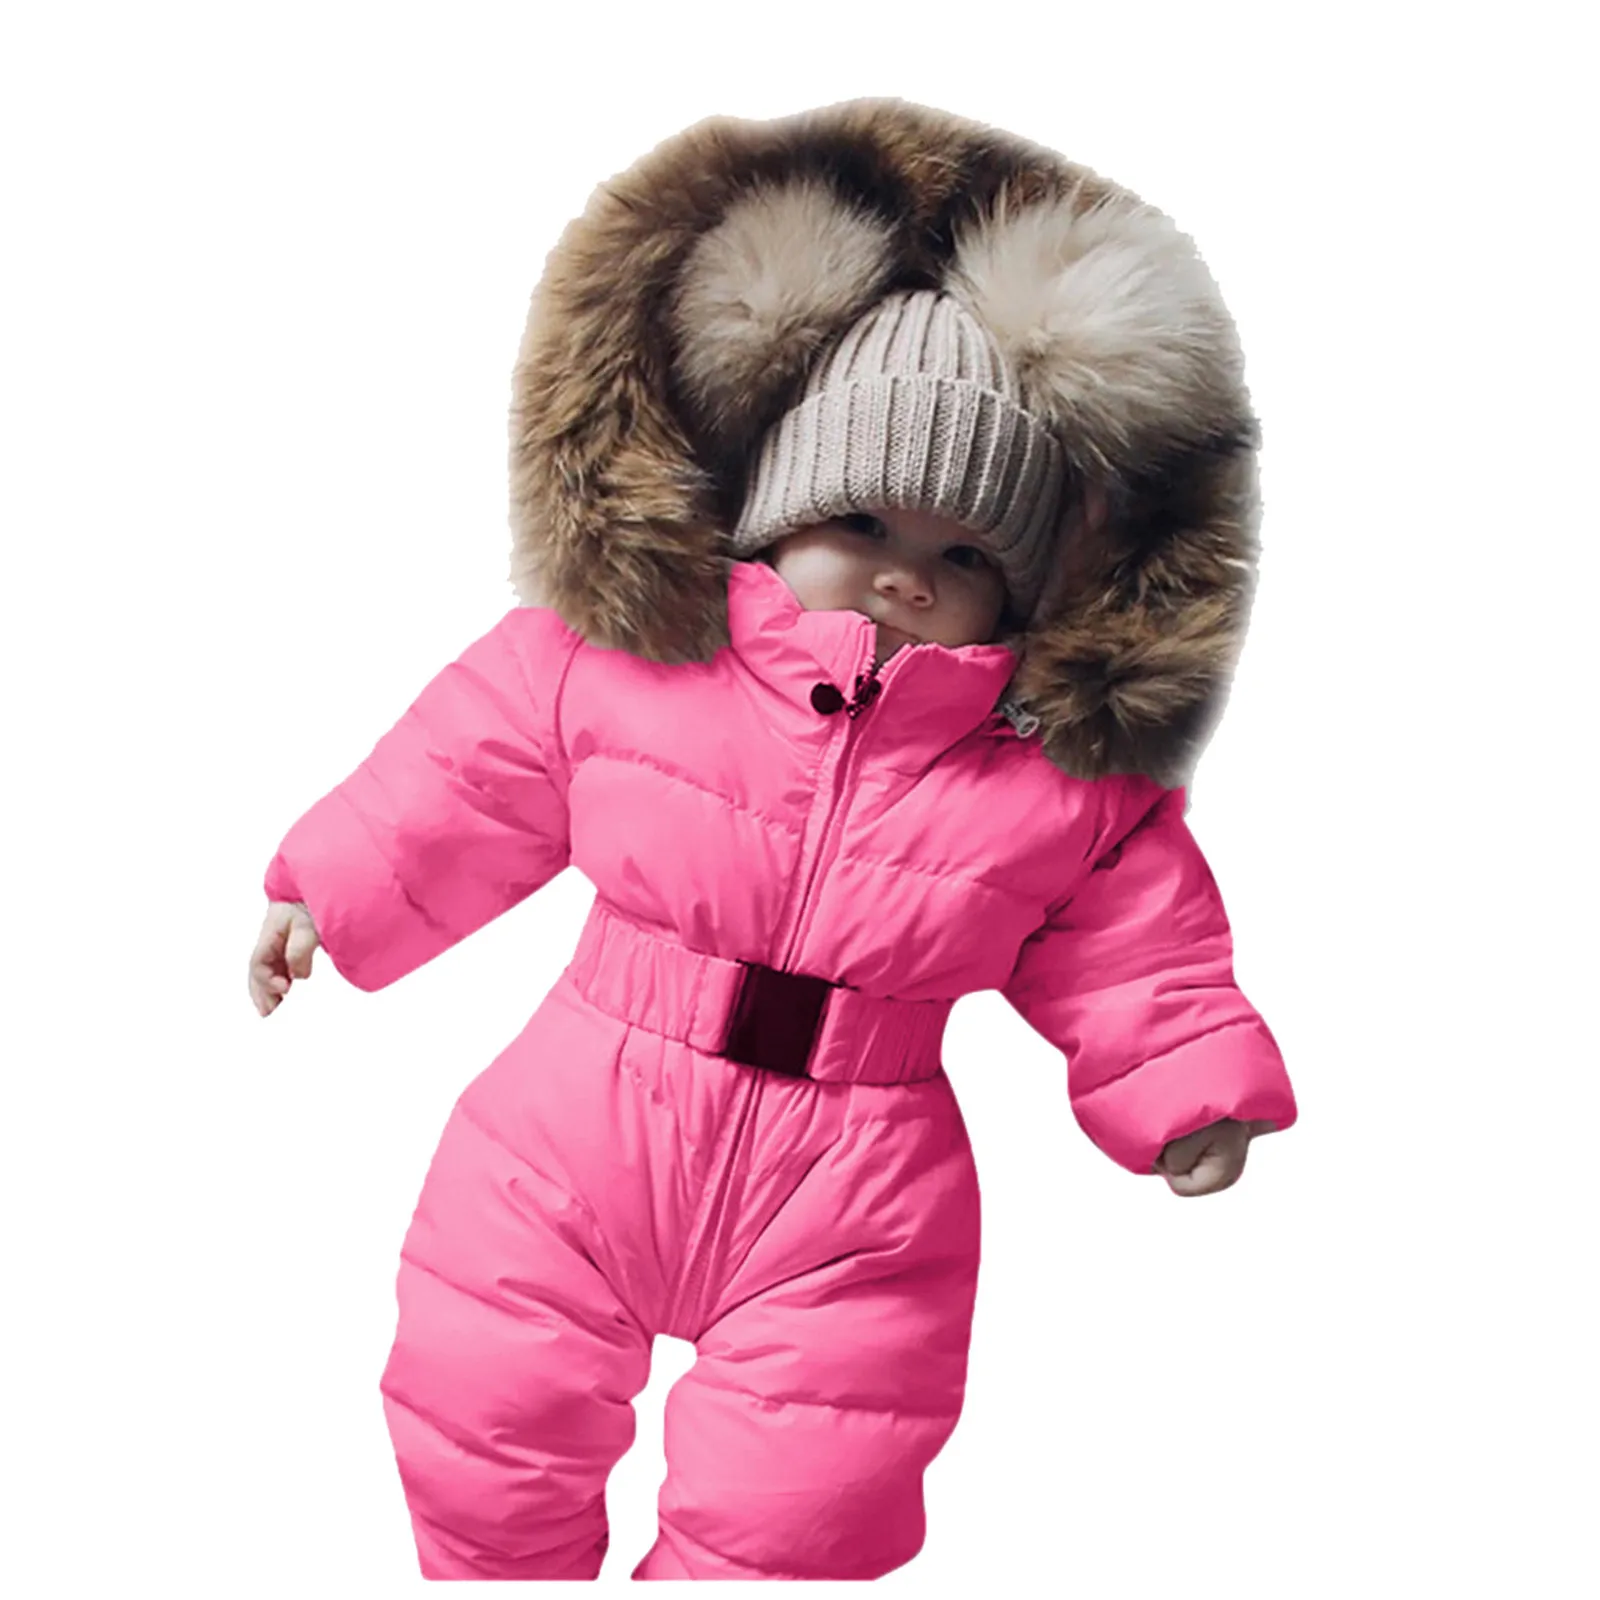 Toddler Infant Baby Boys Girls outerwear Hooded Winter Warm Jacket Down Snowsuit